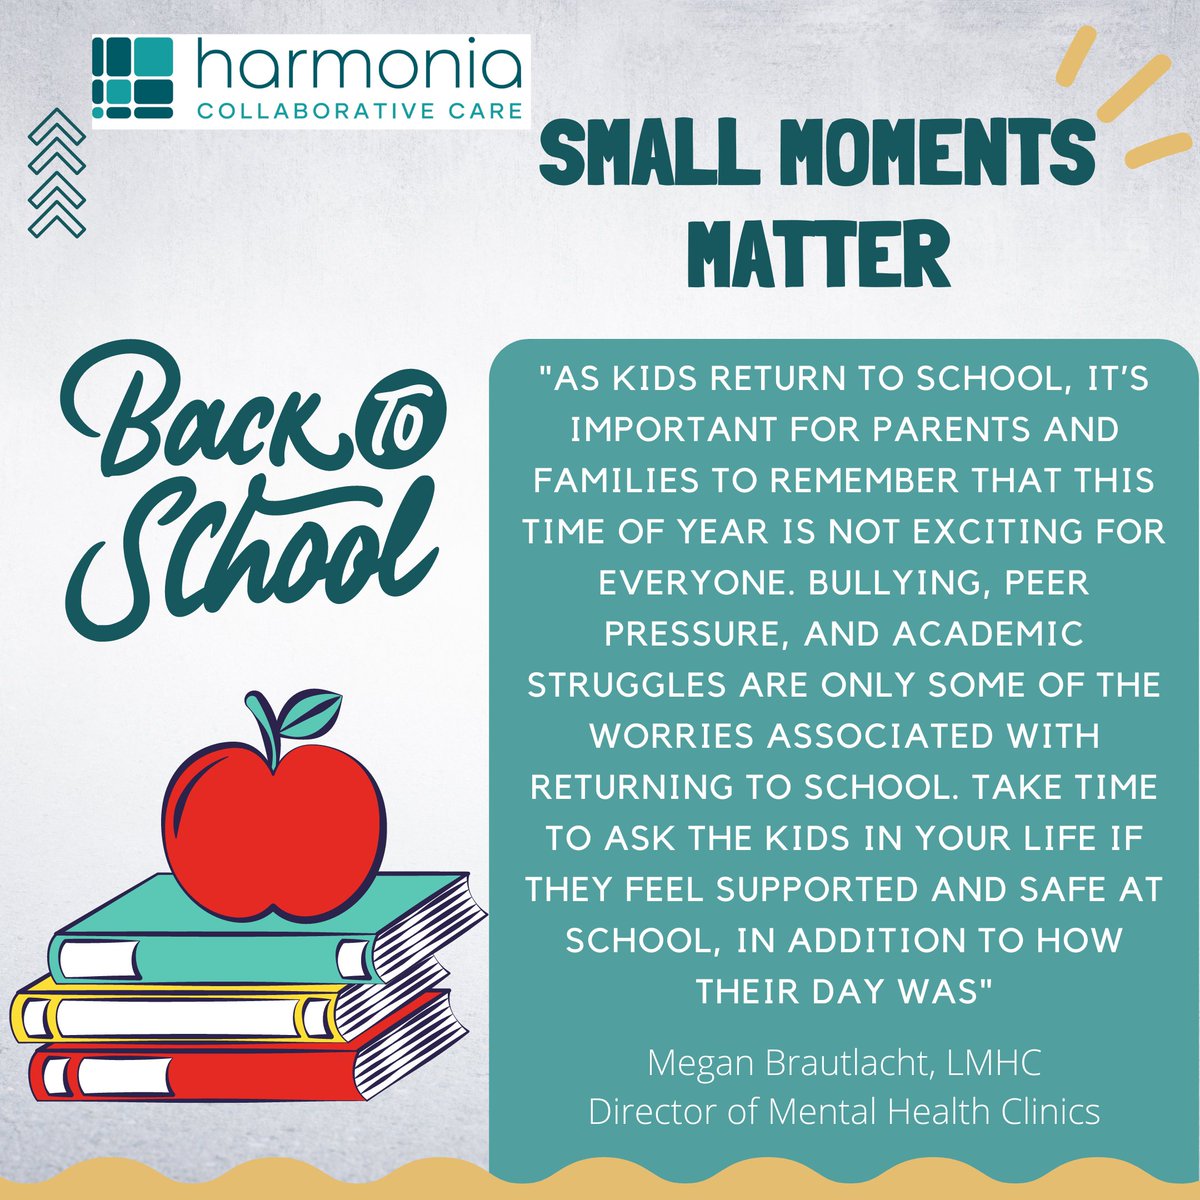 Megan Brautlacht, LMHC our Director of Mental Health Clinics has important advice for the care-givers of students returning to school this week.  

#lifewithbalance #smallmomentsmatter #mentalhealth #backtoschool